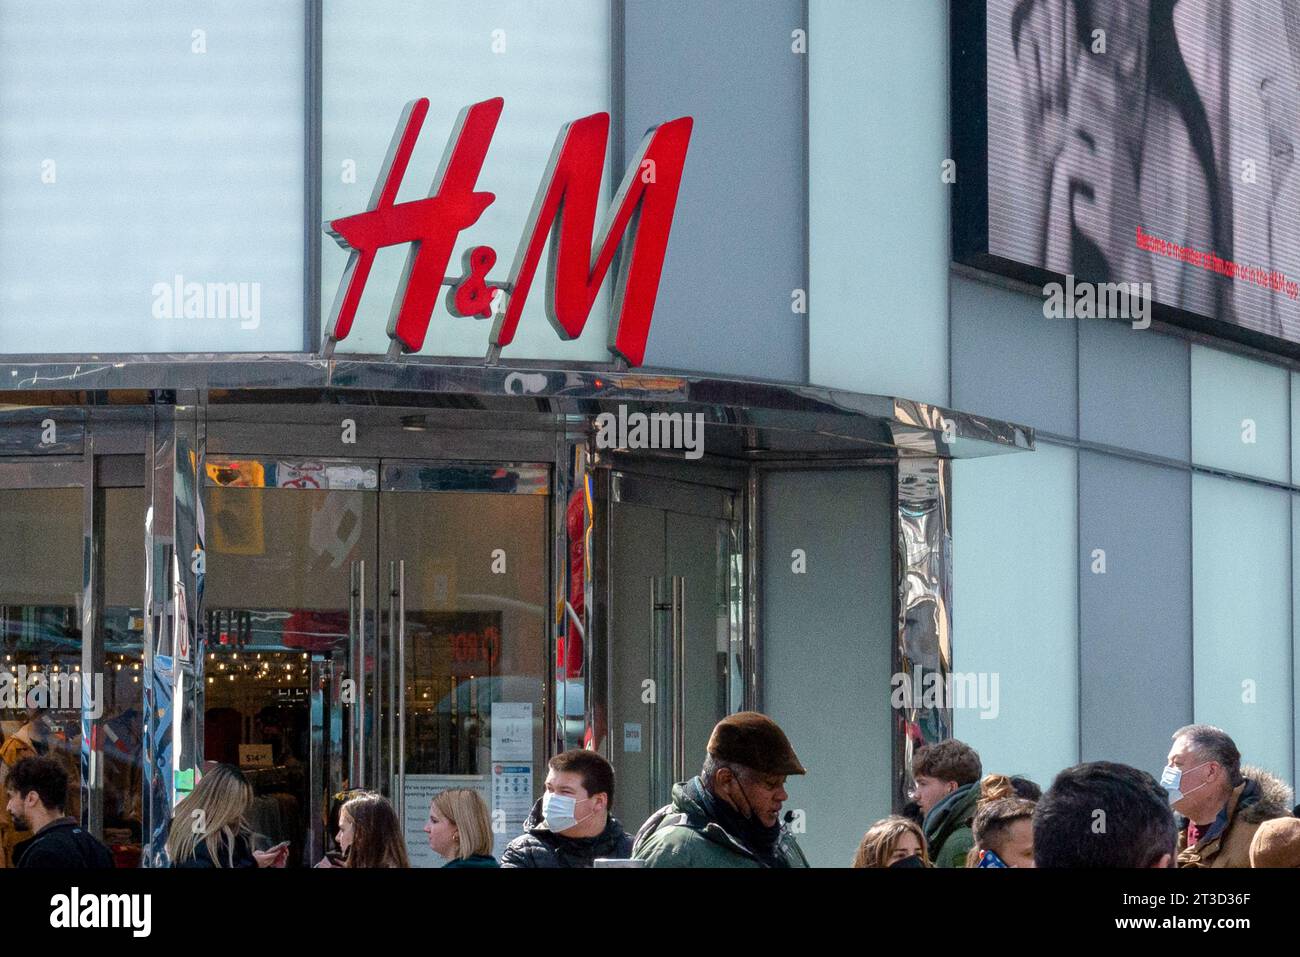 H&M Logo And Store In Antwerp Stock Photo, Picture and Royalty Free Image.  Image 76979434.